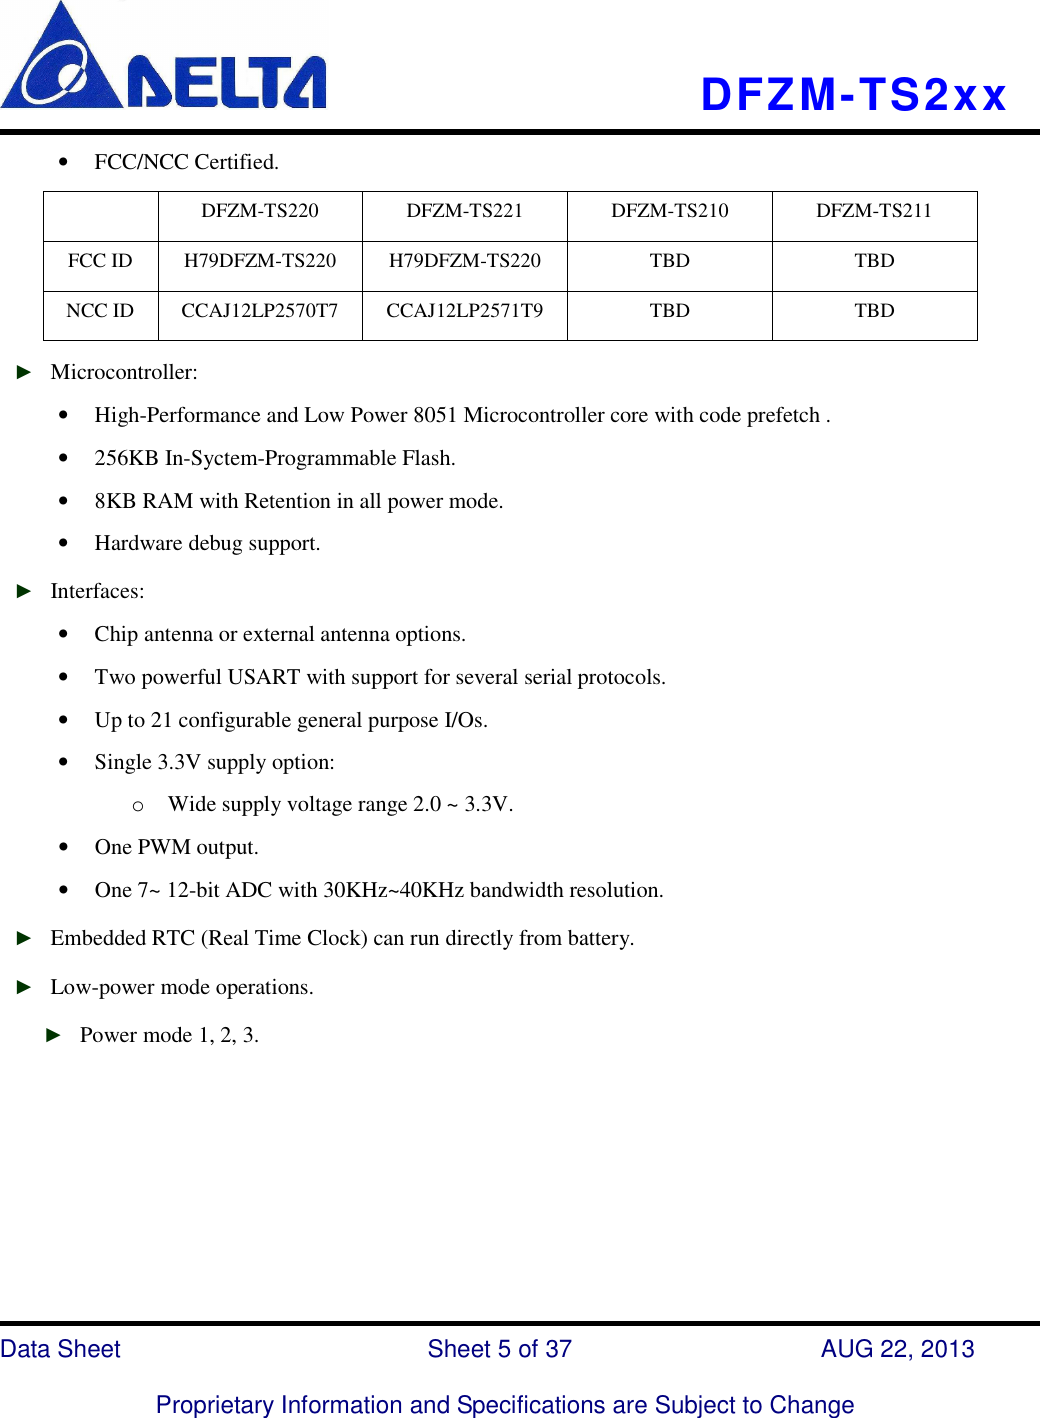    DFZM-TS2xx   Data Sheet                              Sheet 5 of 37                    AUG 22, 2013  Proprietary Information and Specifications are Subject to Change • FCC/NCC Certified.   DFZM-TS220  DFZM-TS221  DFZM-TS210  DFZM-TS211 FCC ID  H79DFZM-TS220  H79DFZM-TS220  TBD  TBD NCC ID  CCAJ12LP2570T7  CCAJ12LP2571T9  TBD  TBD ► Microcontroller: • High-Performance and Low Power 8051 Microcontroller core with code prefetch . • 256KB In-Syctem-Programmable Flash.   • 8KB RAM with Retention in all power mode. • Hardware debug support. ► Interfaces: • Chip antenna or external antenna options. • Two powerful USART with support for several serial protocols. • Up to 21 configurable general purpose I/Os. • Single 3.3V supply option: o Wide supply voltage range 2.0 ~ 3.3V.   • One PWM output. • One 7~ 12-bit ADC with 30KHz~40KHz bandwidth resolution. ► Embedded RTC (Real Time Clock) can run directly from battery. ► Low-power mode operations. ► Power mode 1, 2, 3.          